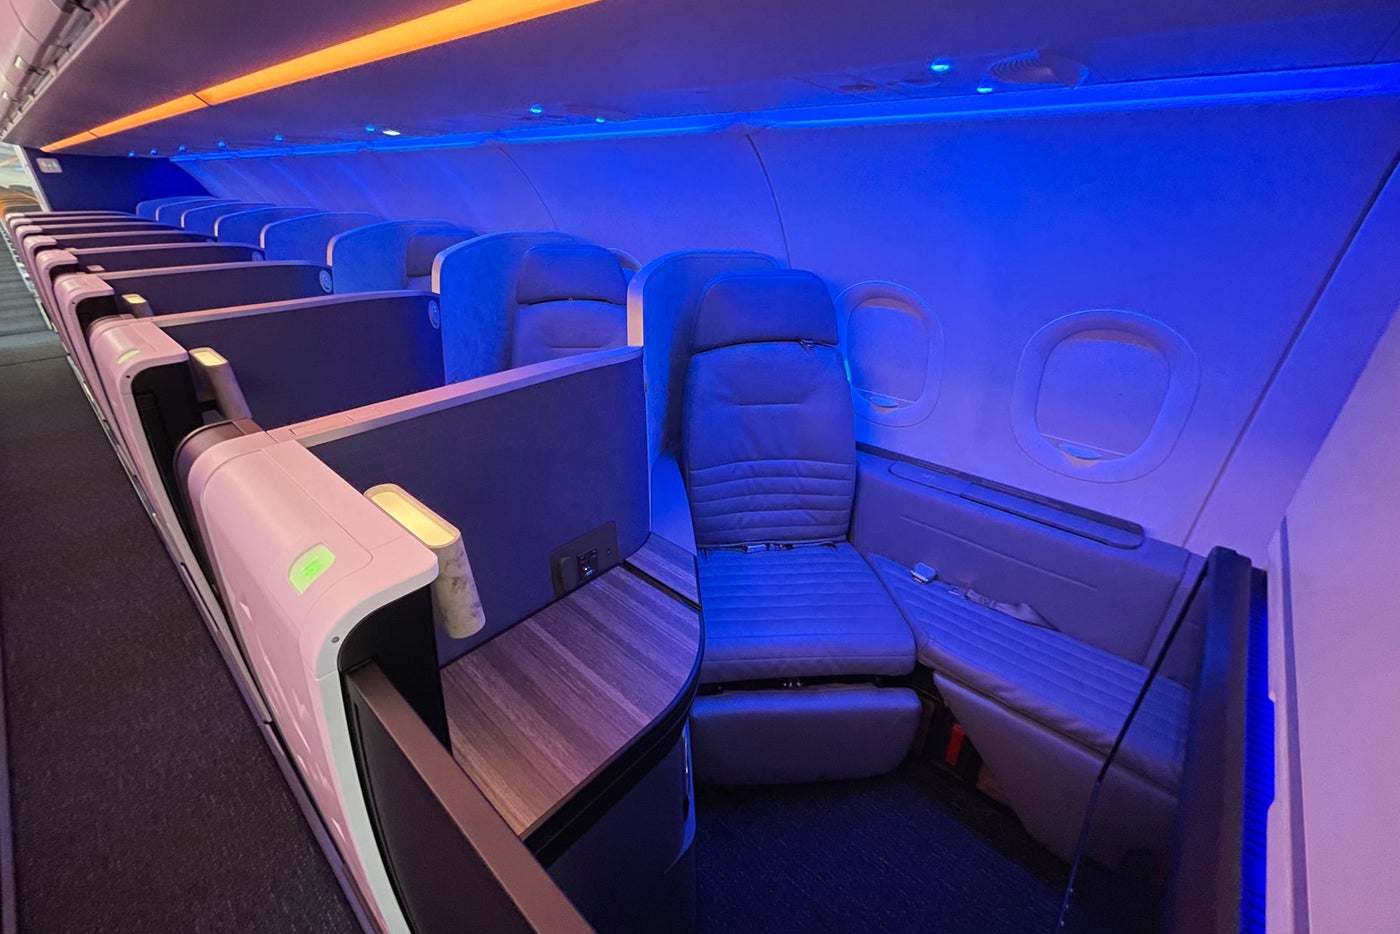 Book the first A321neo flights with JetBlue's new Mint business class